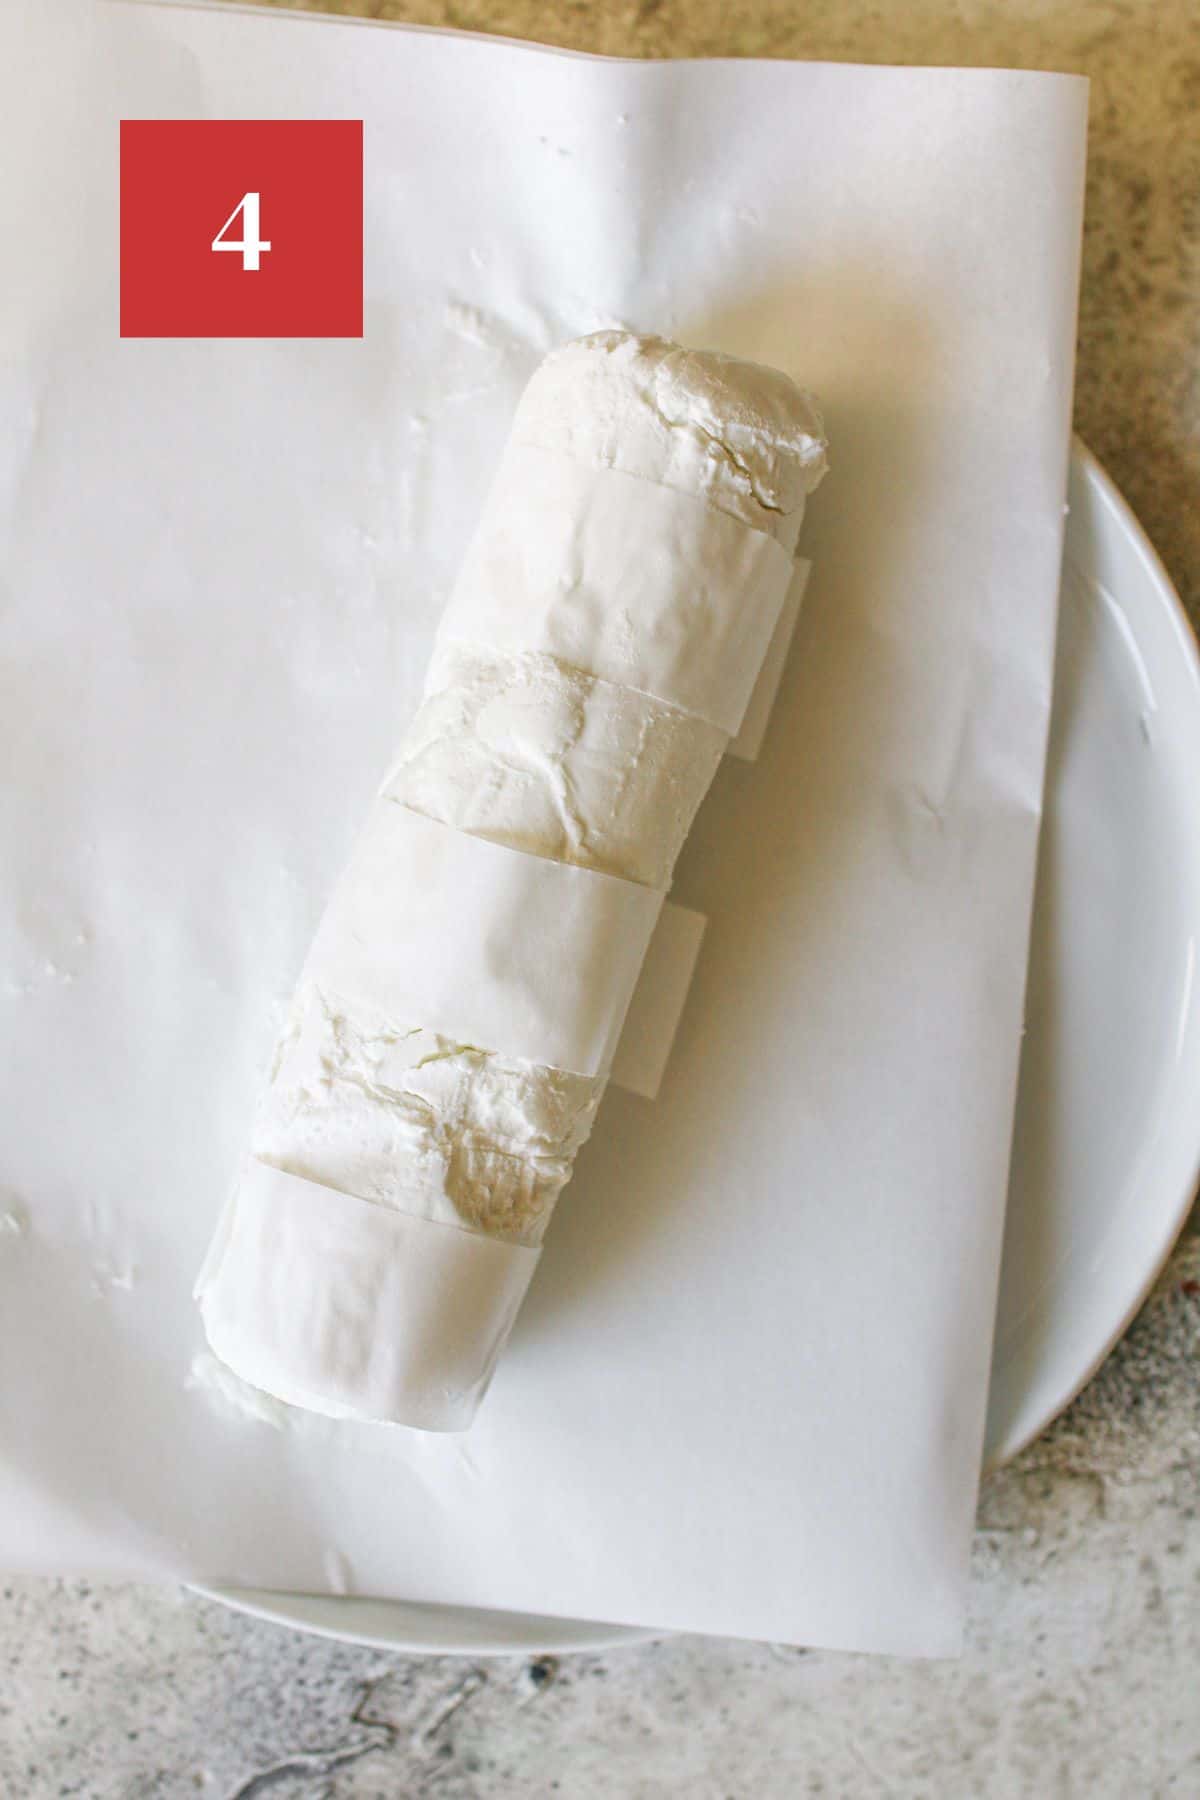 A goat cheese log on a white parchment paper on a white plate. The goat cheese it wrapped with strips of white parchment paper with some of the goat cheese exposed. The plate sits on a cement background. In the upper left corner is a dark red square with a white '4' in the center.